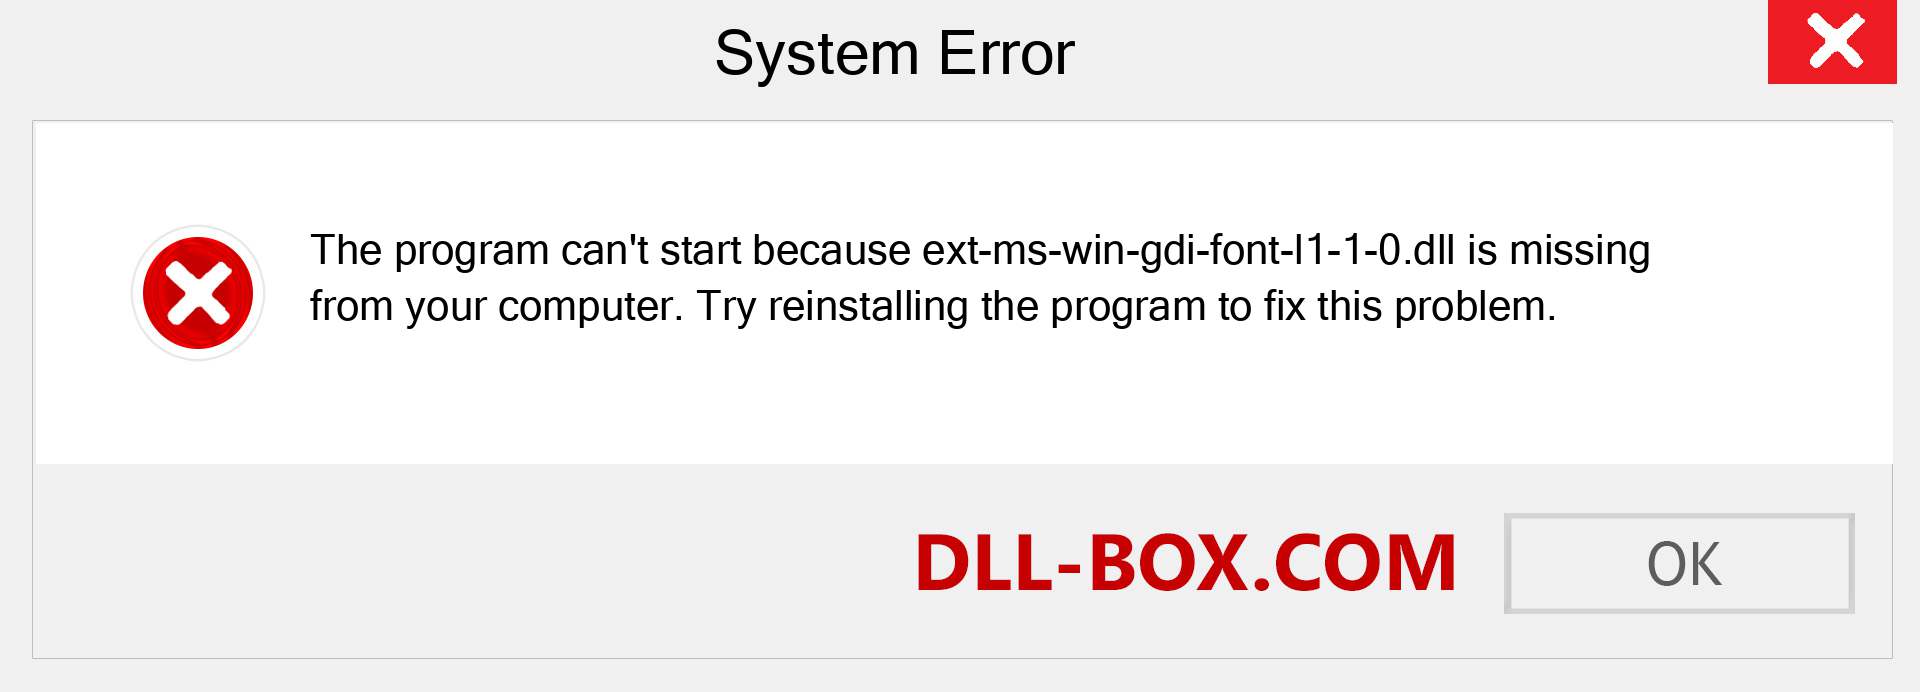  ext-ms-win-gdi-font-l1-1-0.dll file is missing?. Download for Windows 7, 8, 10 - Fix  ext-ms-win-gdi-font-l1-1-0 dll Missing Error on Windows, photos, images